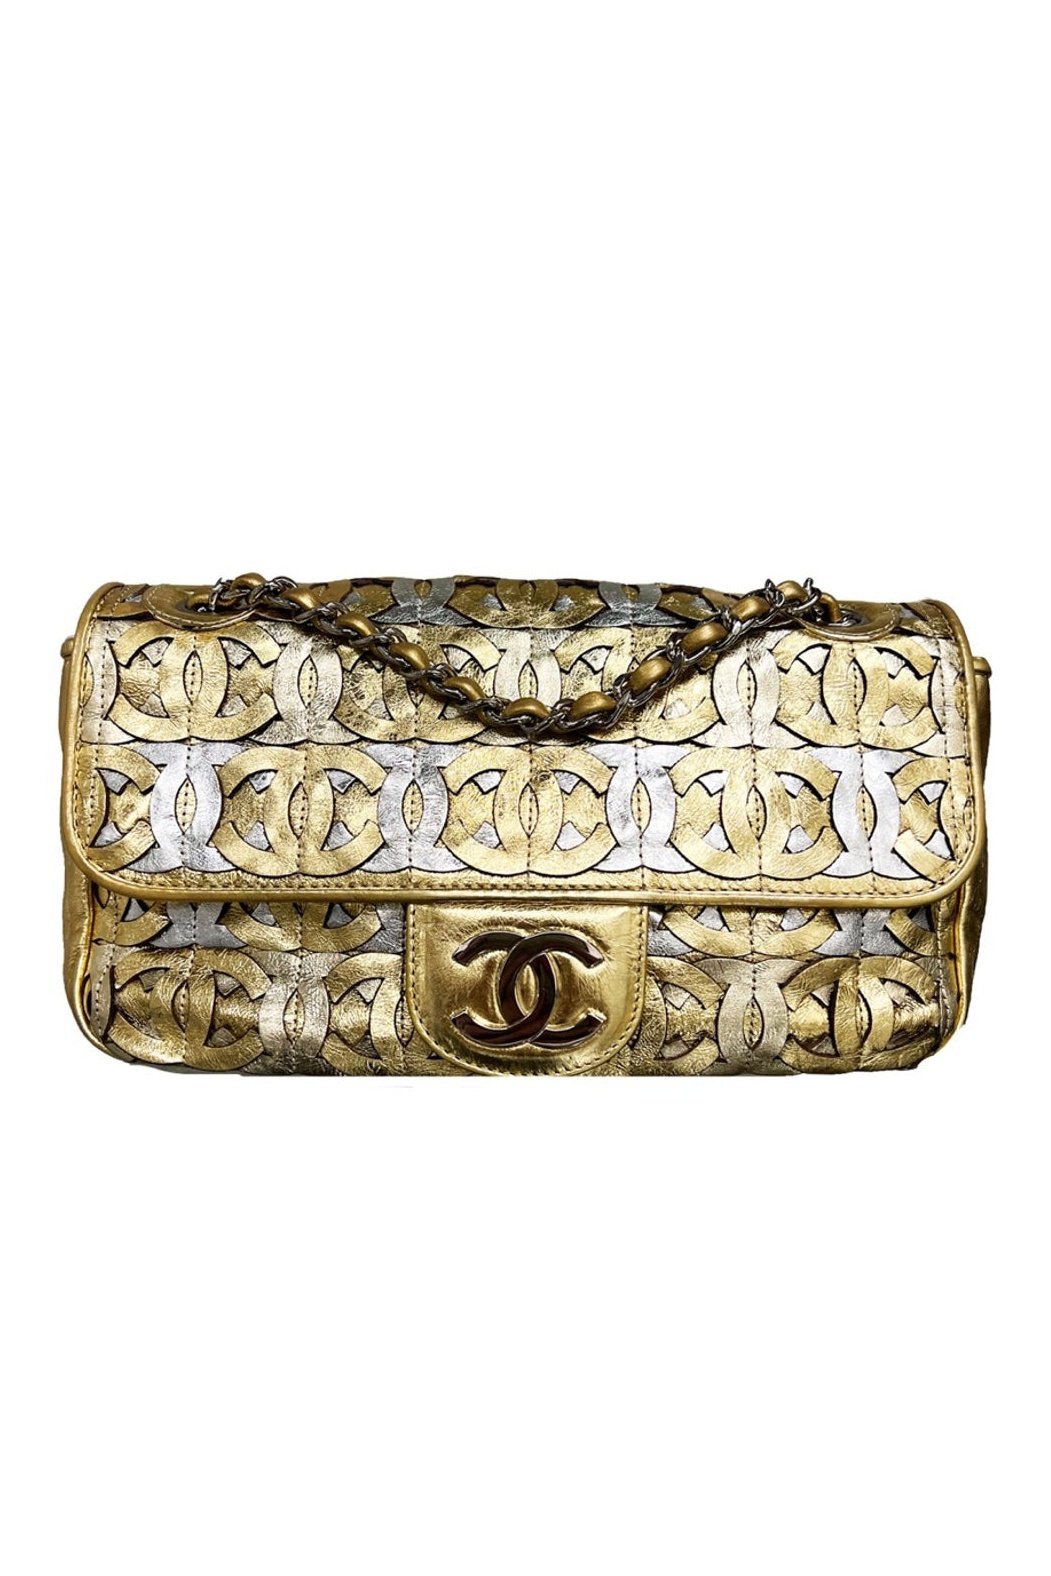 Authentic Chanel Vintage Rare Black Lizard Camera Bag – Marta's of Raleigh